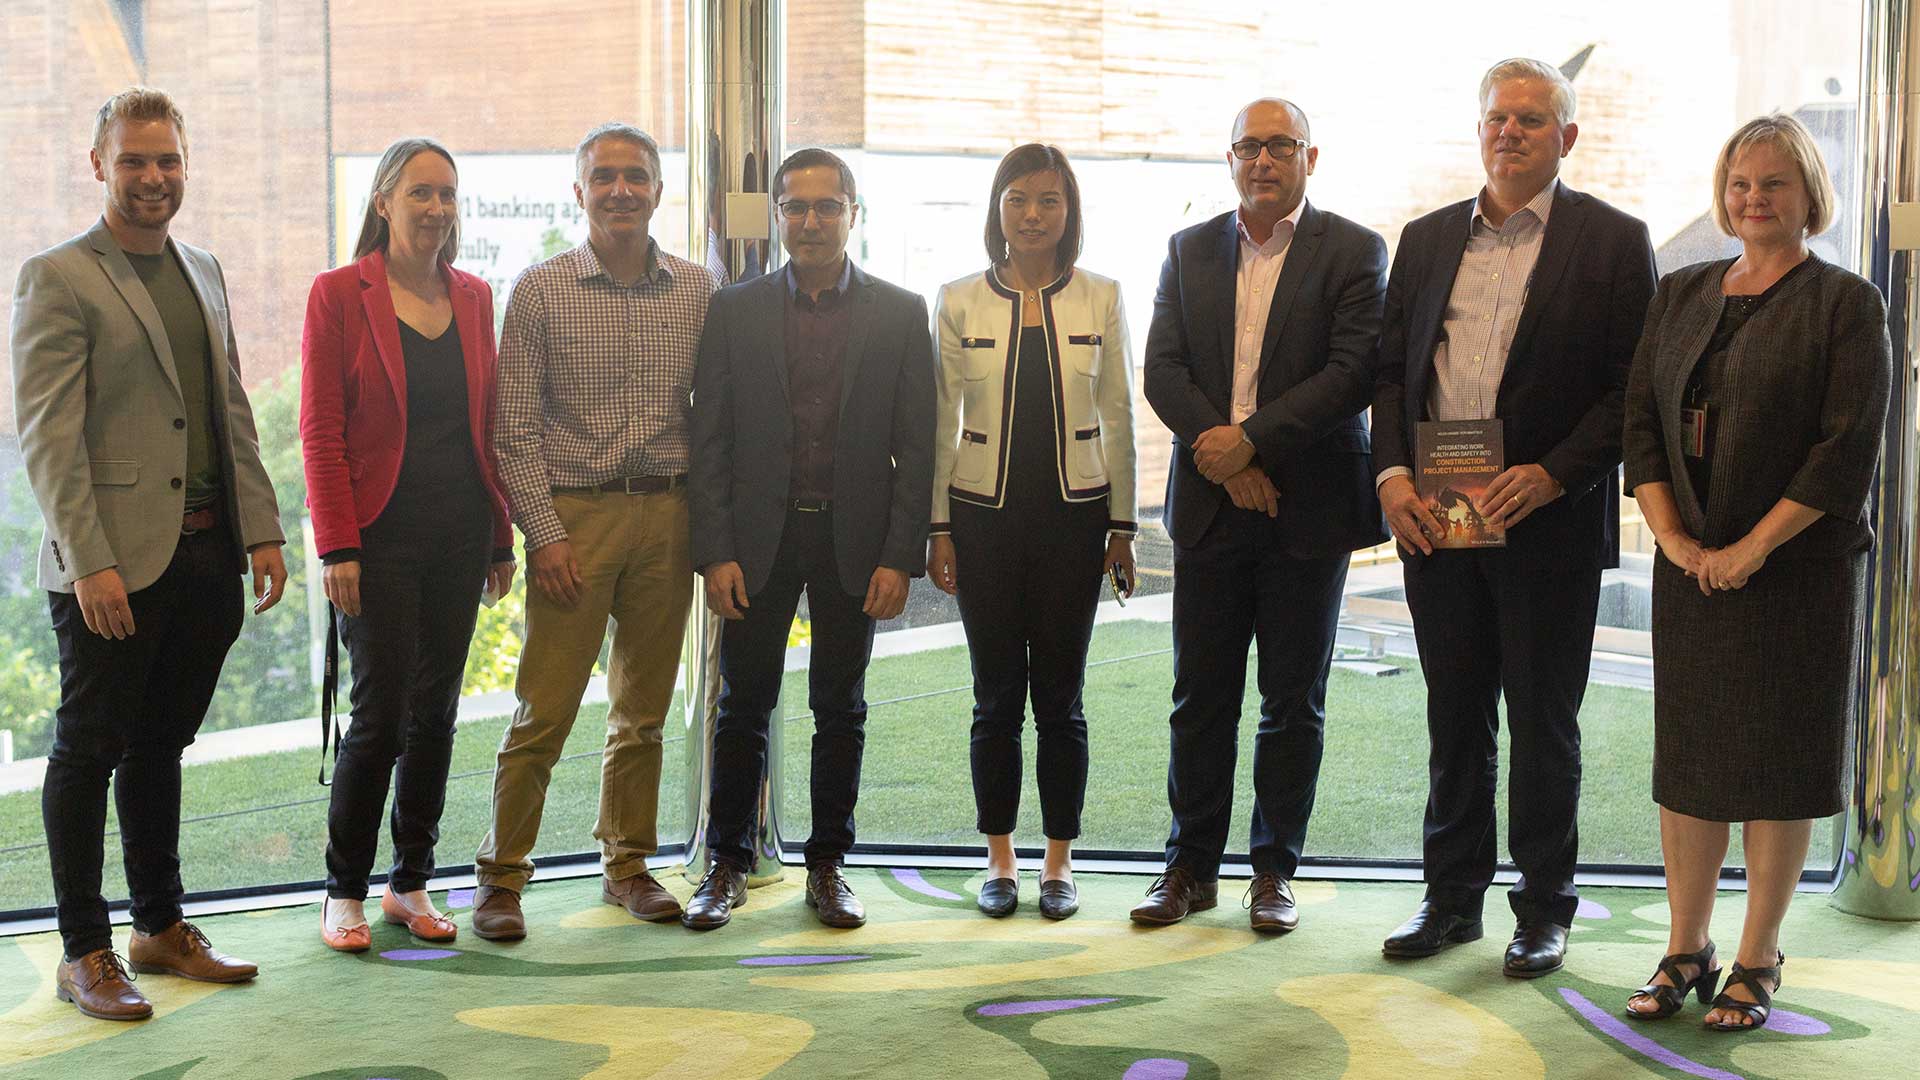 Pictured (l to r): Dr David Oswald, Assoc. Prof. Michelle Turner, Prof. Nick Blismas, Dr Payam Pirzadeh, Dr Rita Zhang, Corey Hannett (Director General of Victoria’s Major Transport Infrastructure Authority), Prof. Ron Wakefield and Dist. Prof. Helen Lingard at the book launch. 